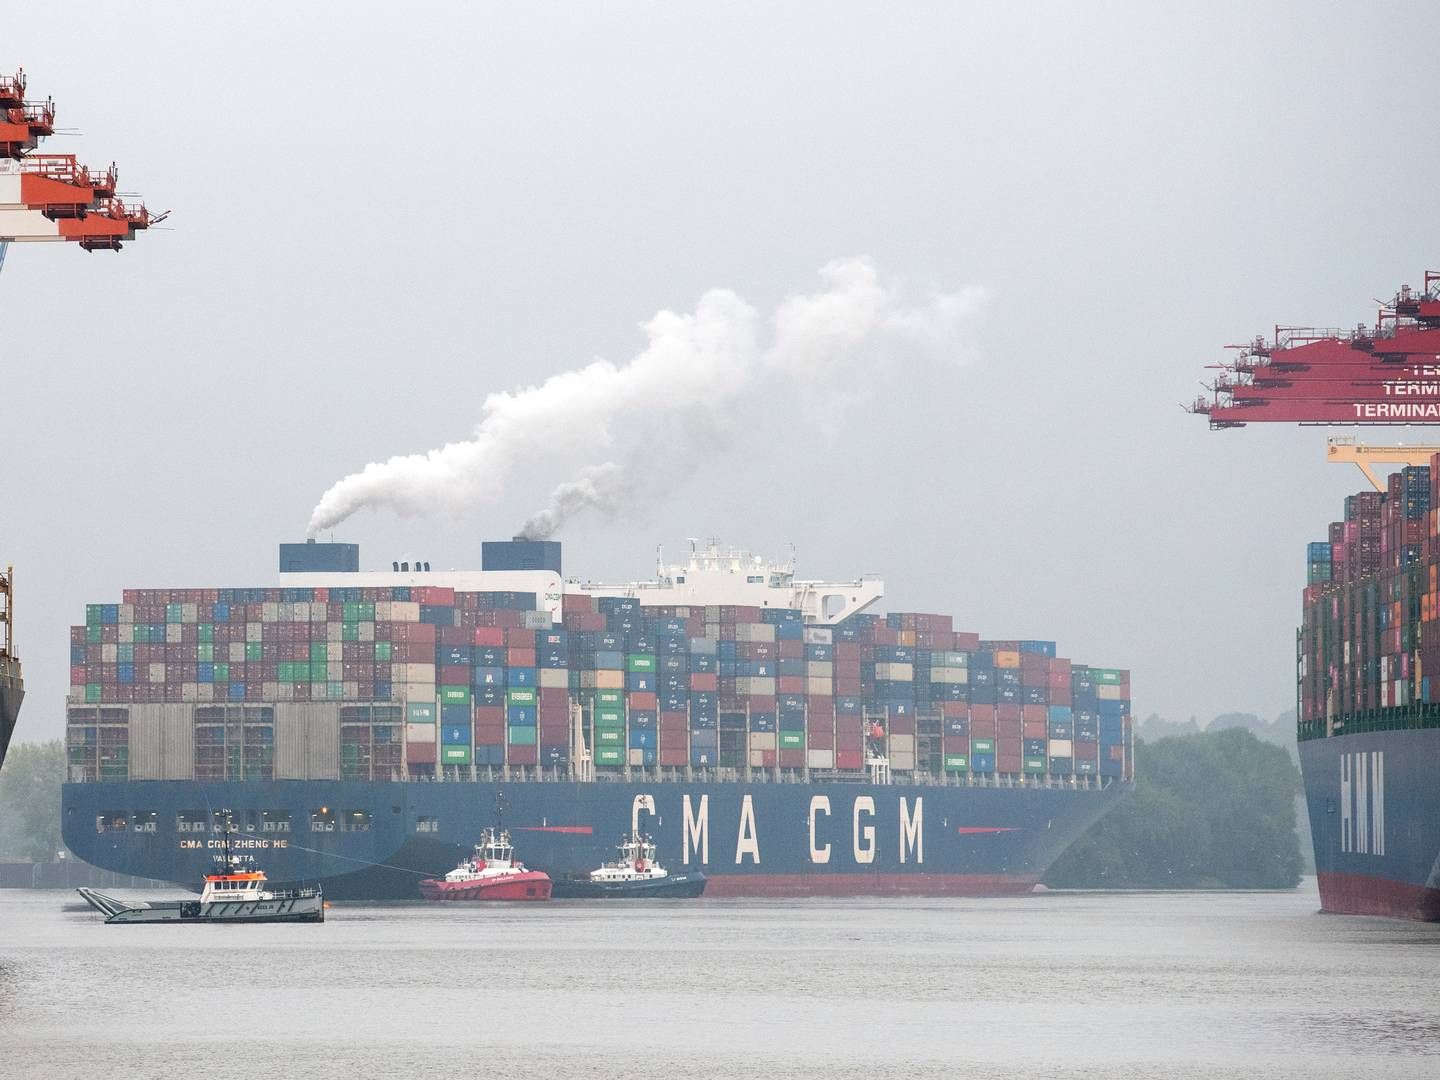 French carrier CMA CGM and South Korean HMM have both ordered ships that can sail on green methanol. | Photo: Daniel Bockwoldt/AP/Ritzau Scanpix